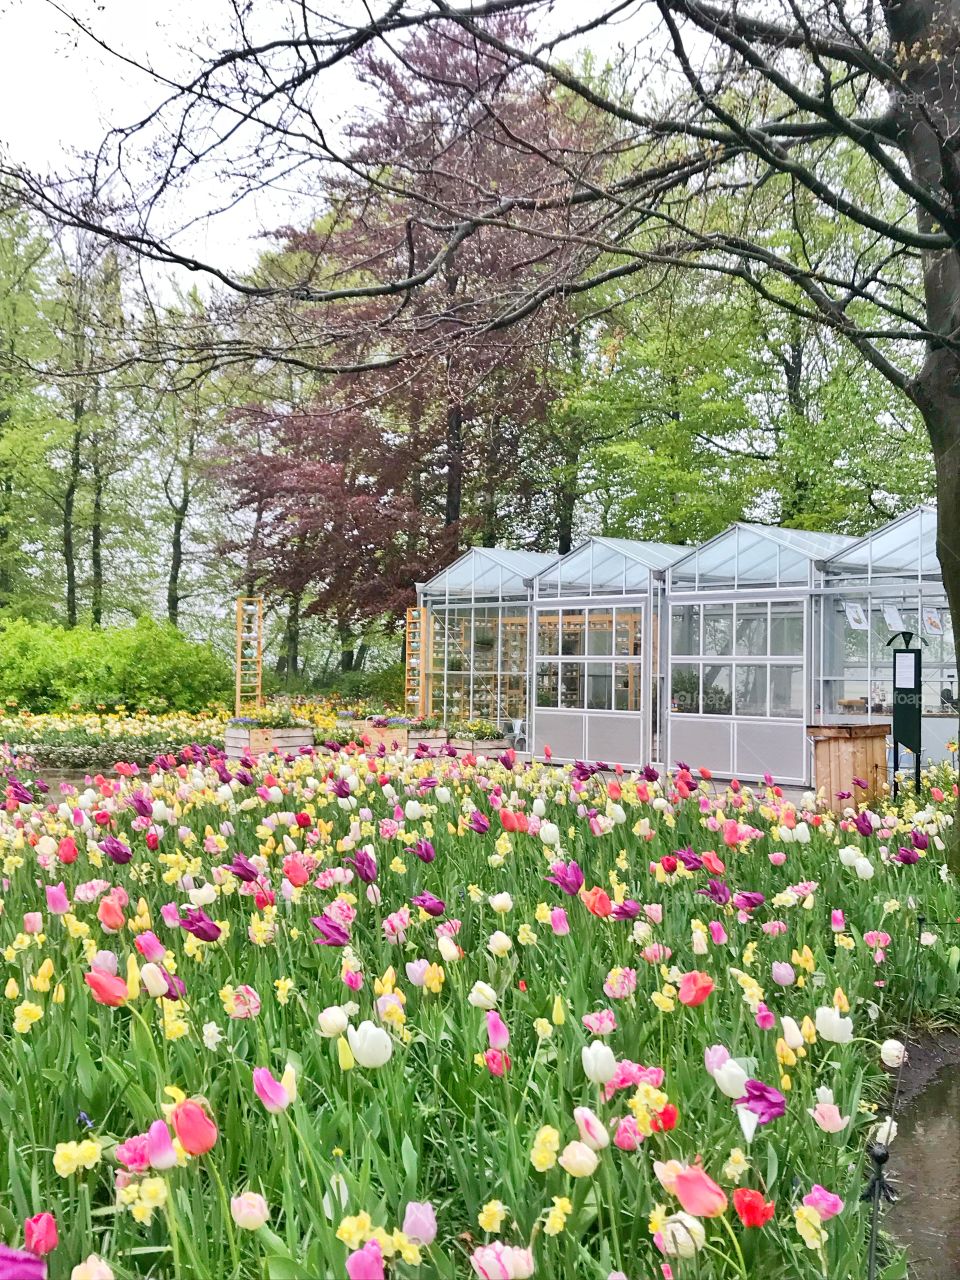 Colourful tulips and glass house in Keukenhof garden, Holland